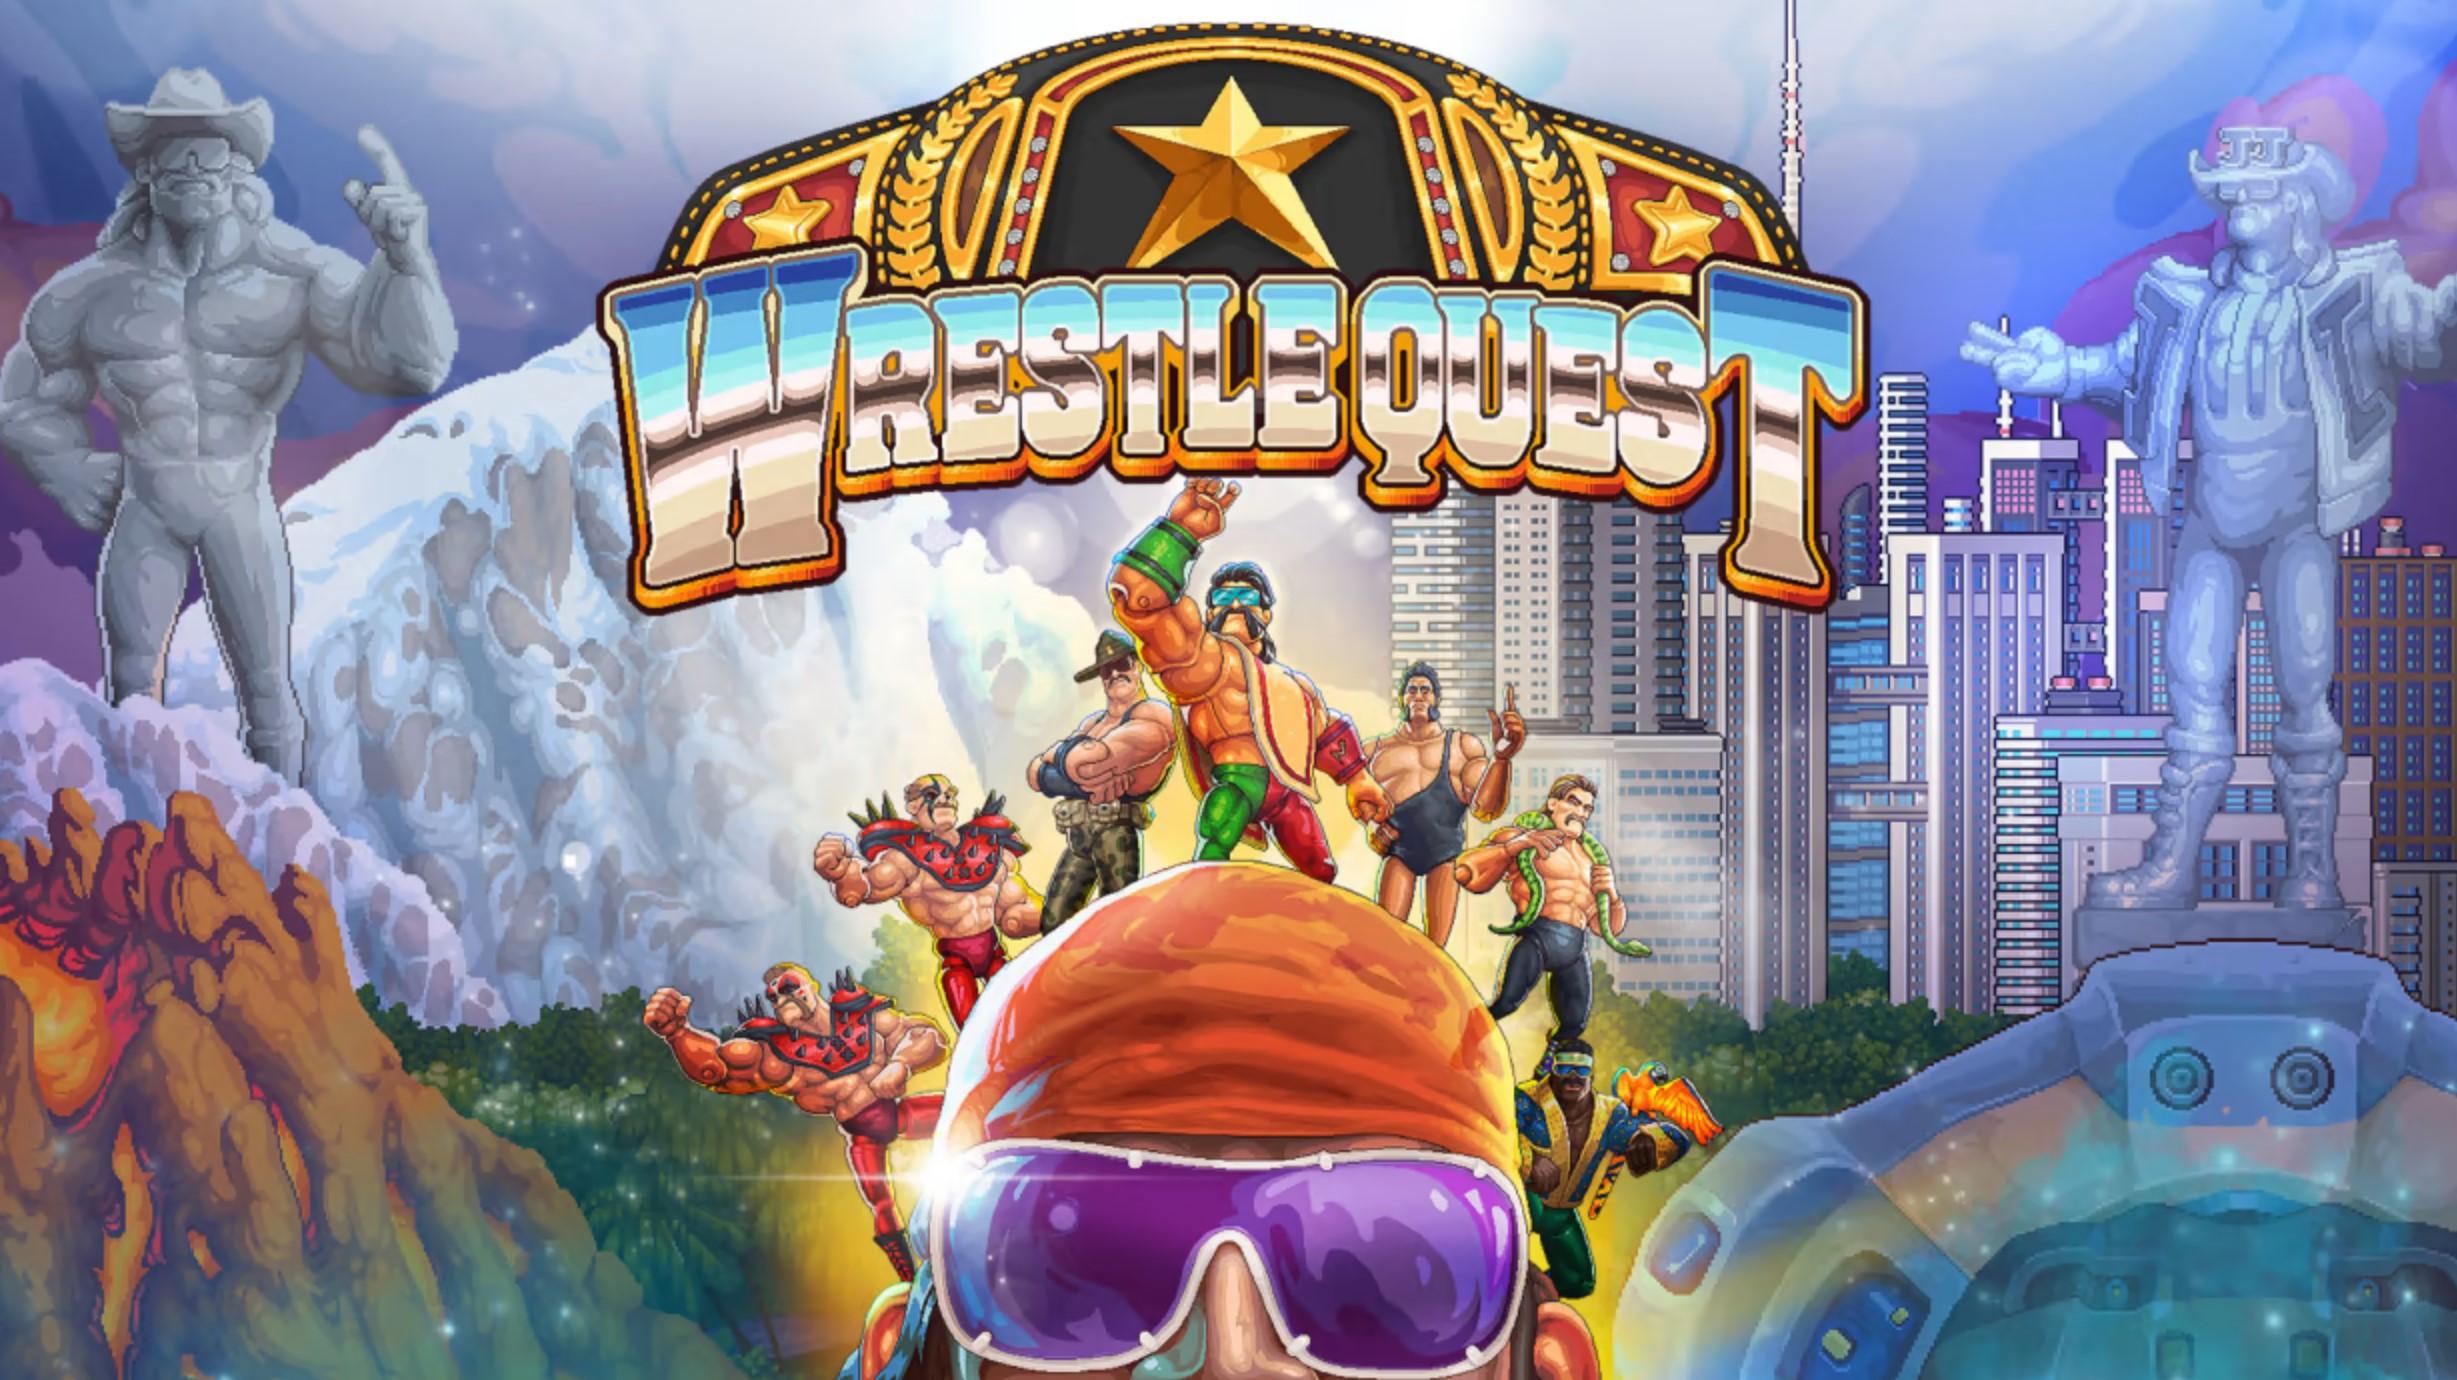 WrestleQuest review: That's sports entertainment